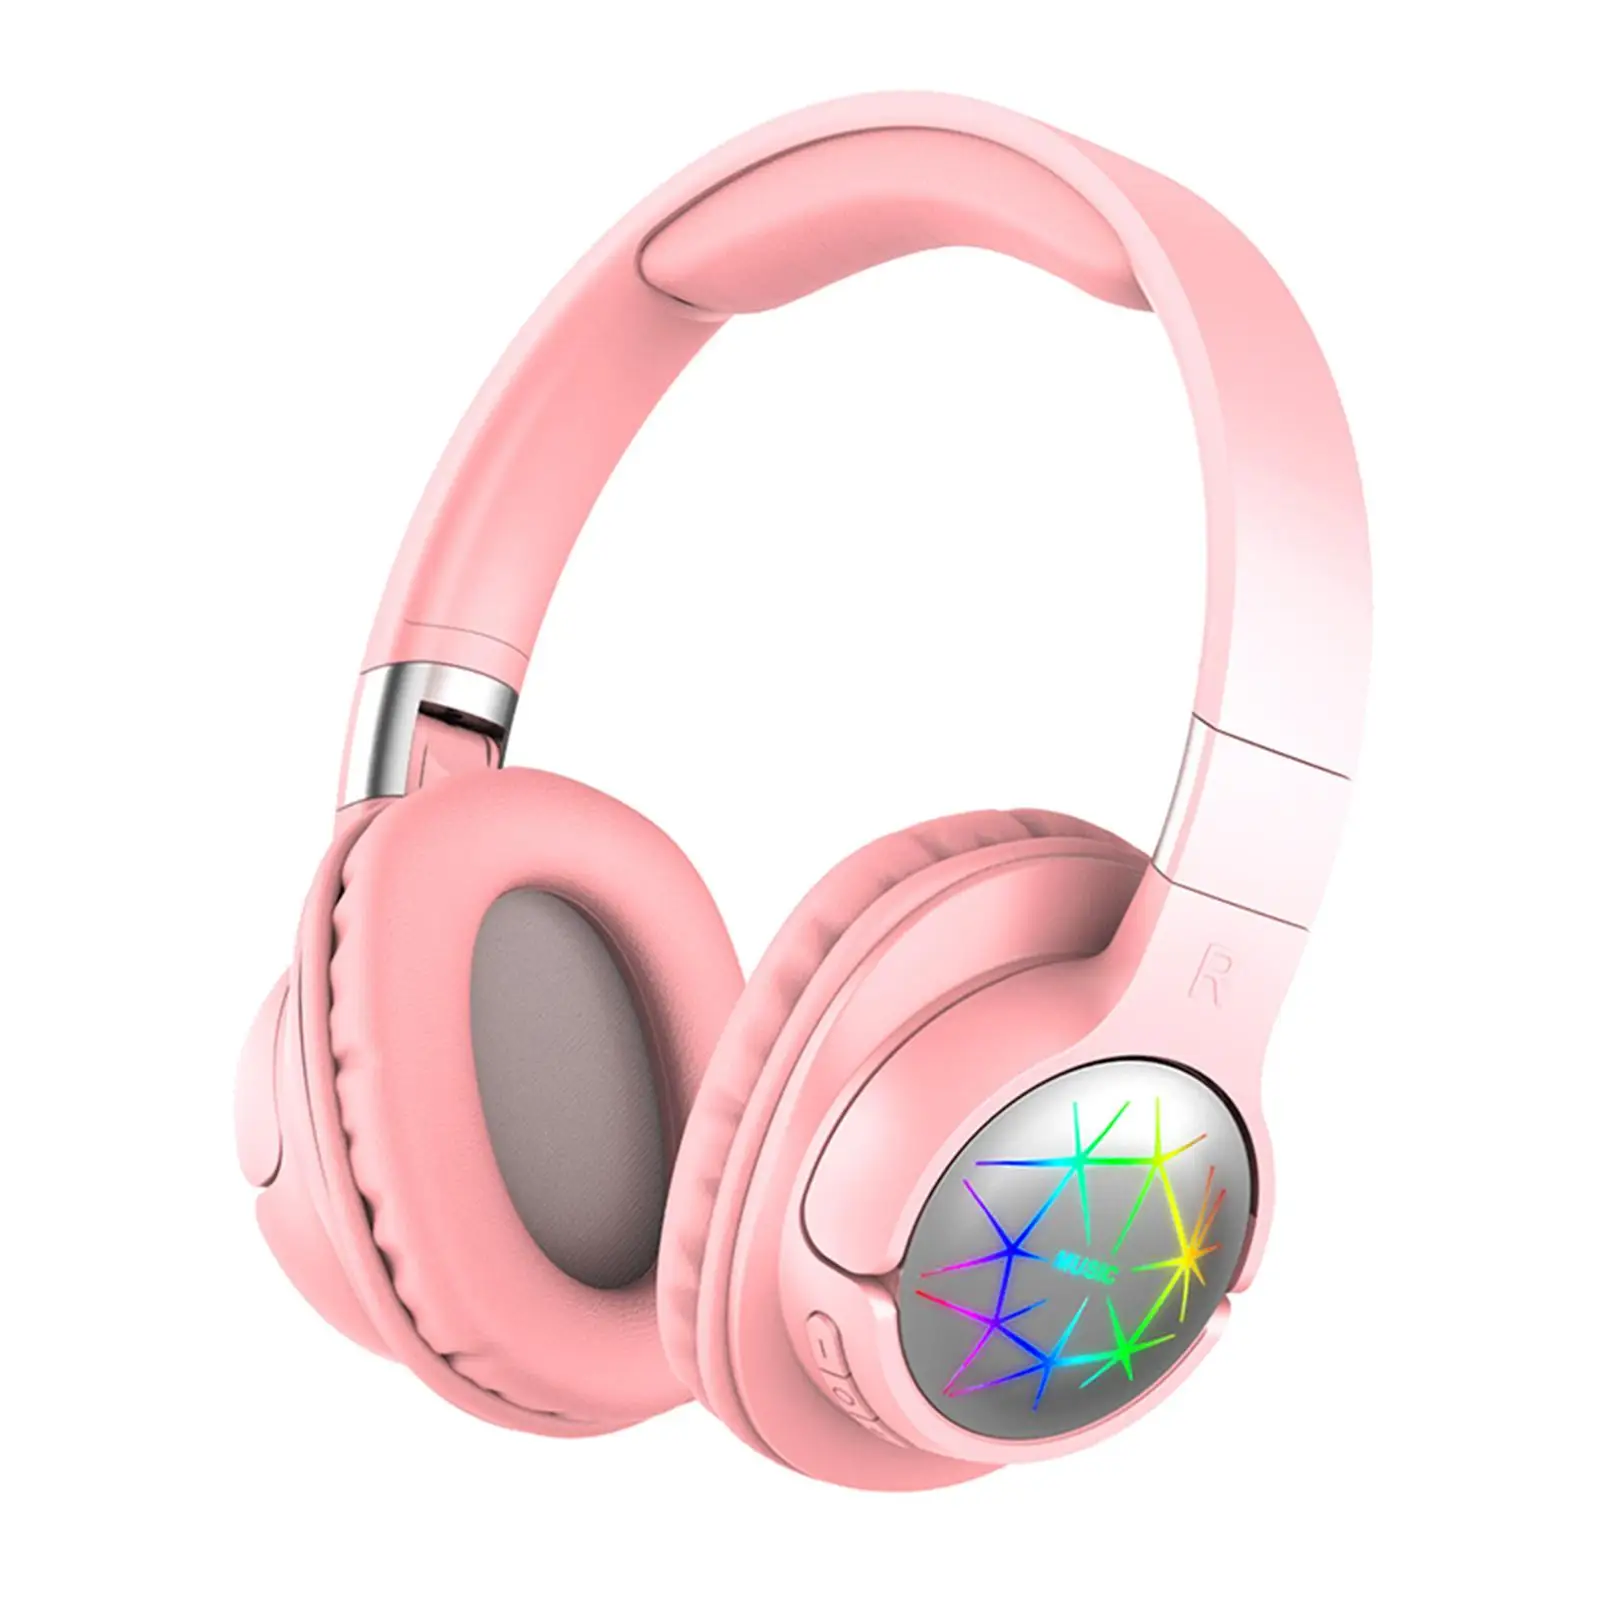 Over-Ear Bluetooth Headphones Stretchable Soft Earmuffs for Game PC Phone